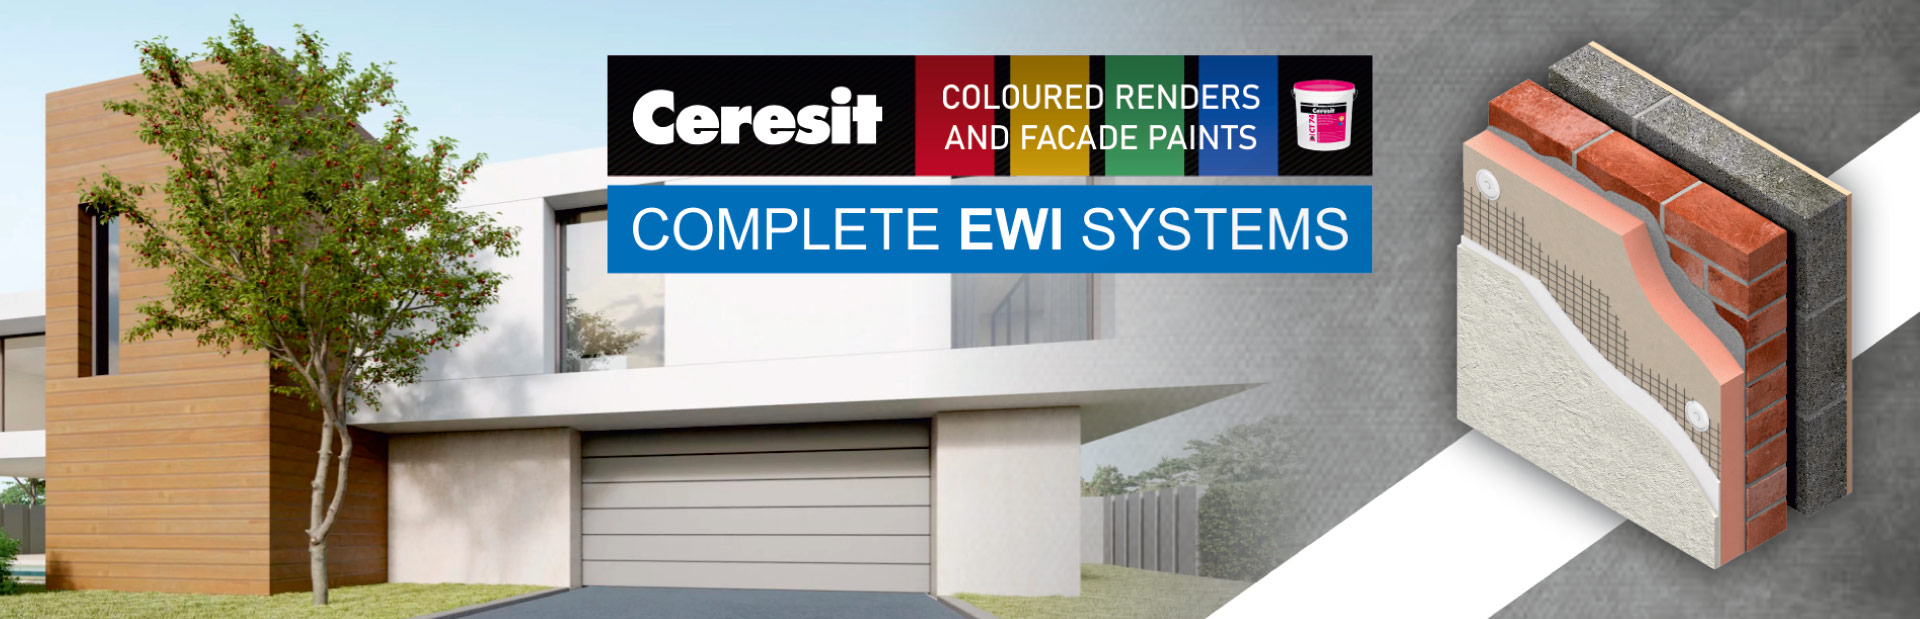 Ceresit - Complete EWI Systems